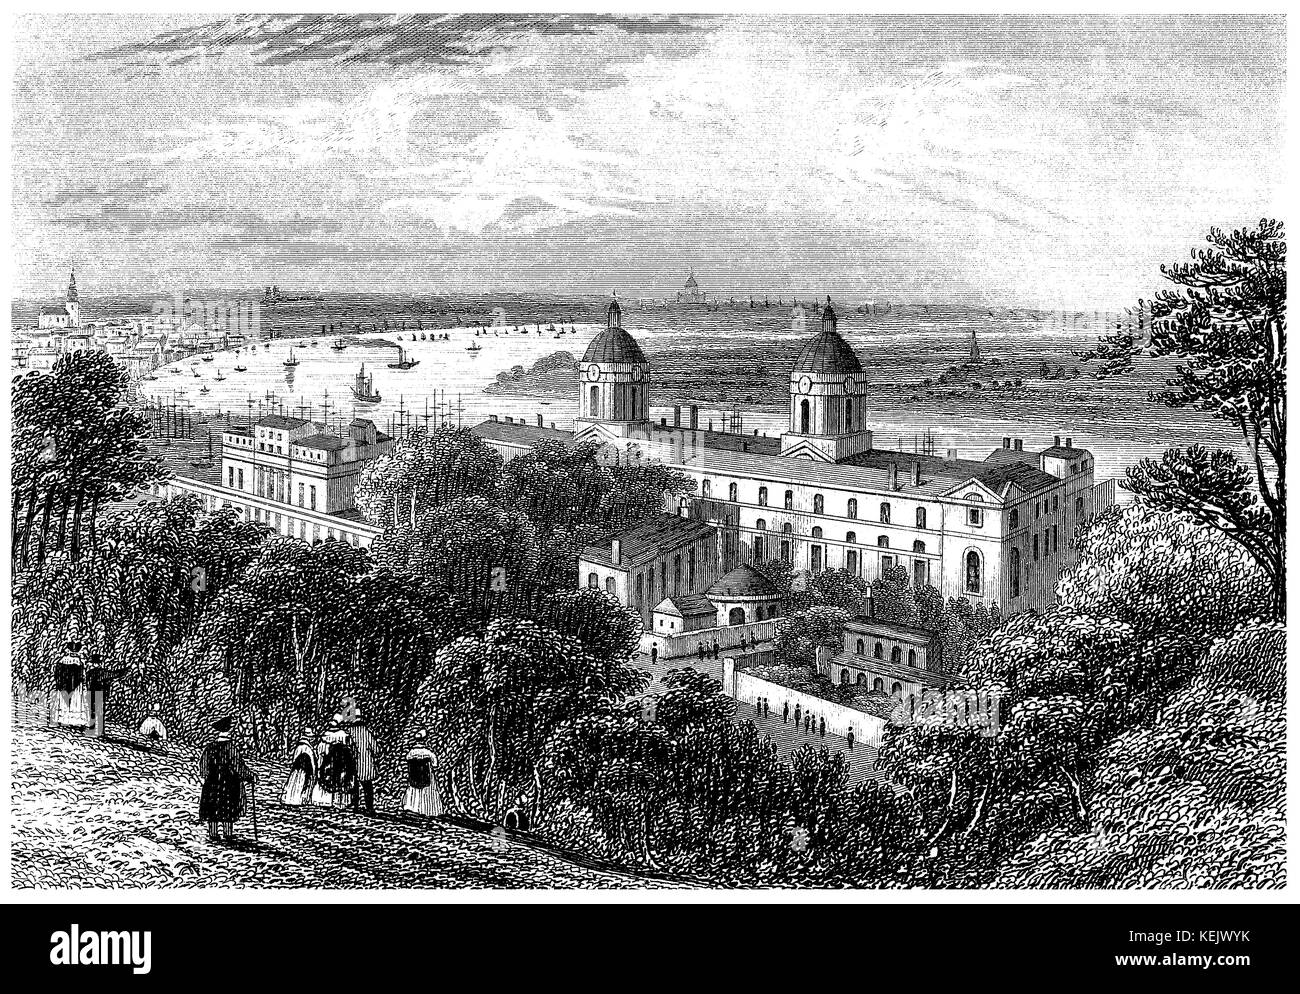 1853 engraving of the Royal Hospital for Seamen at Greenwich (now known as the Old Royal Naval College) from Greenwich Park, London. Stock Photo